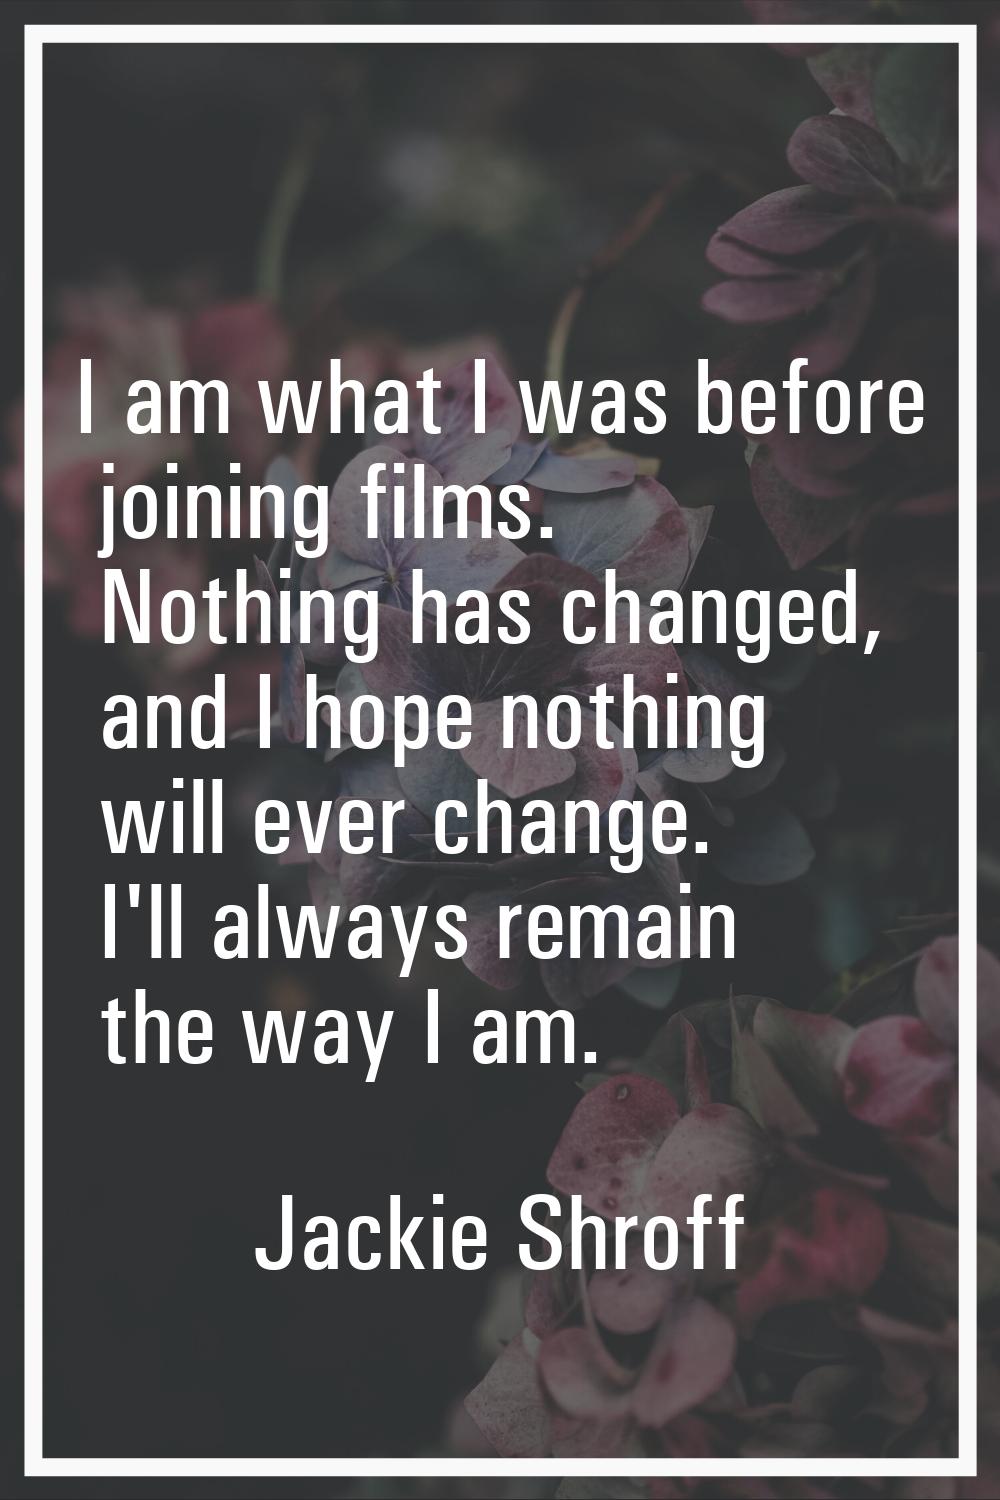 I am what I was before joining films. Nothing has changed, and I hope nothing will ever change. I'l